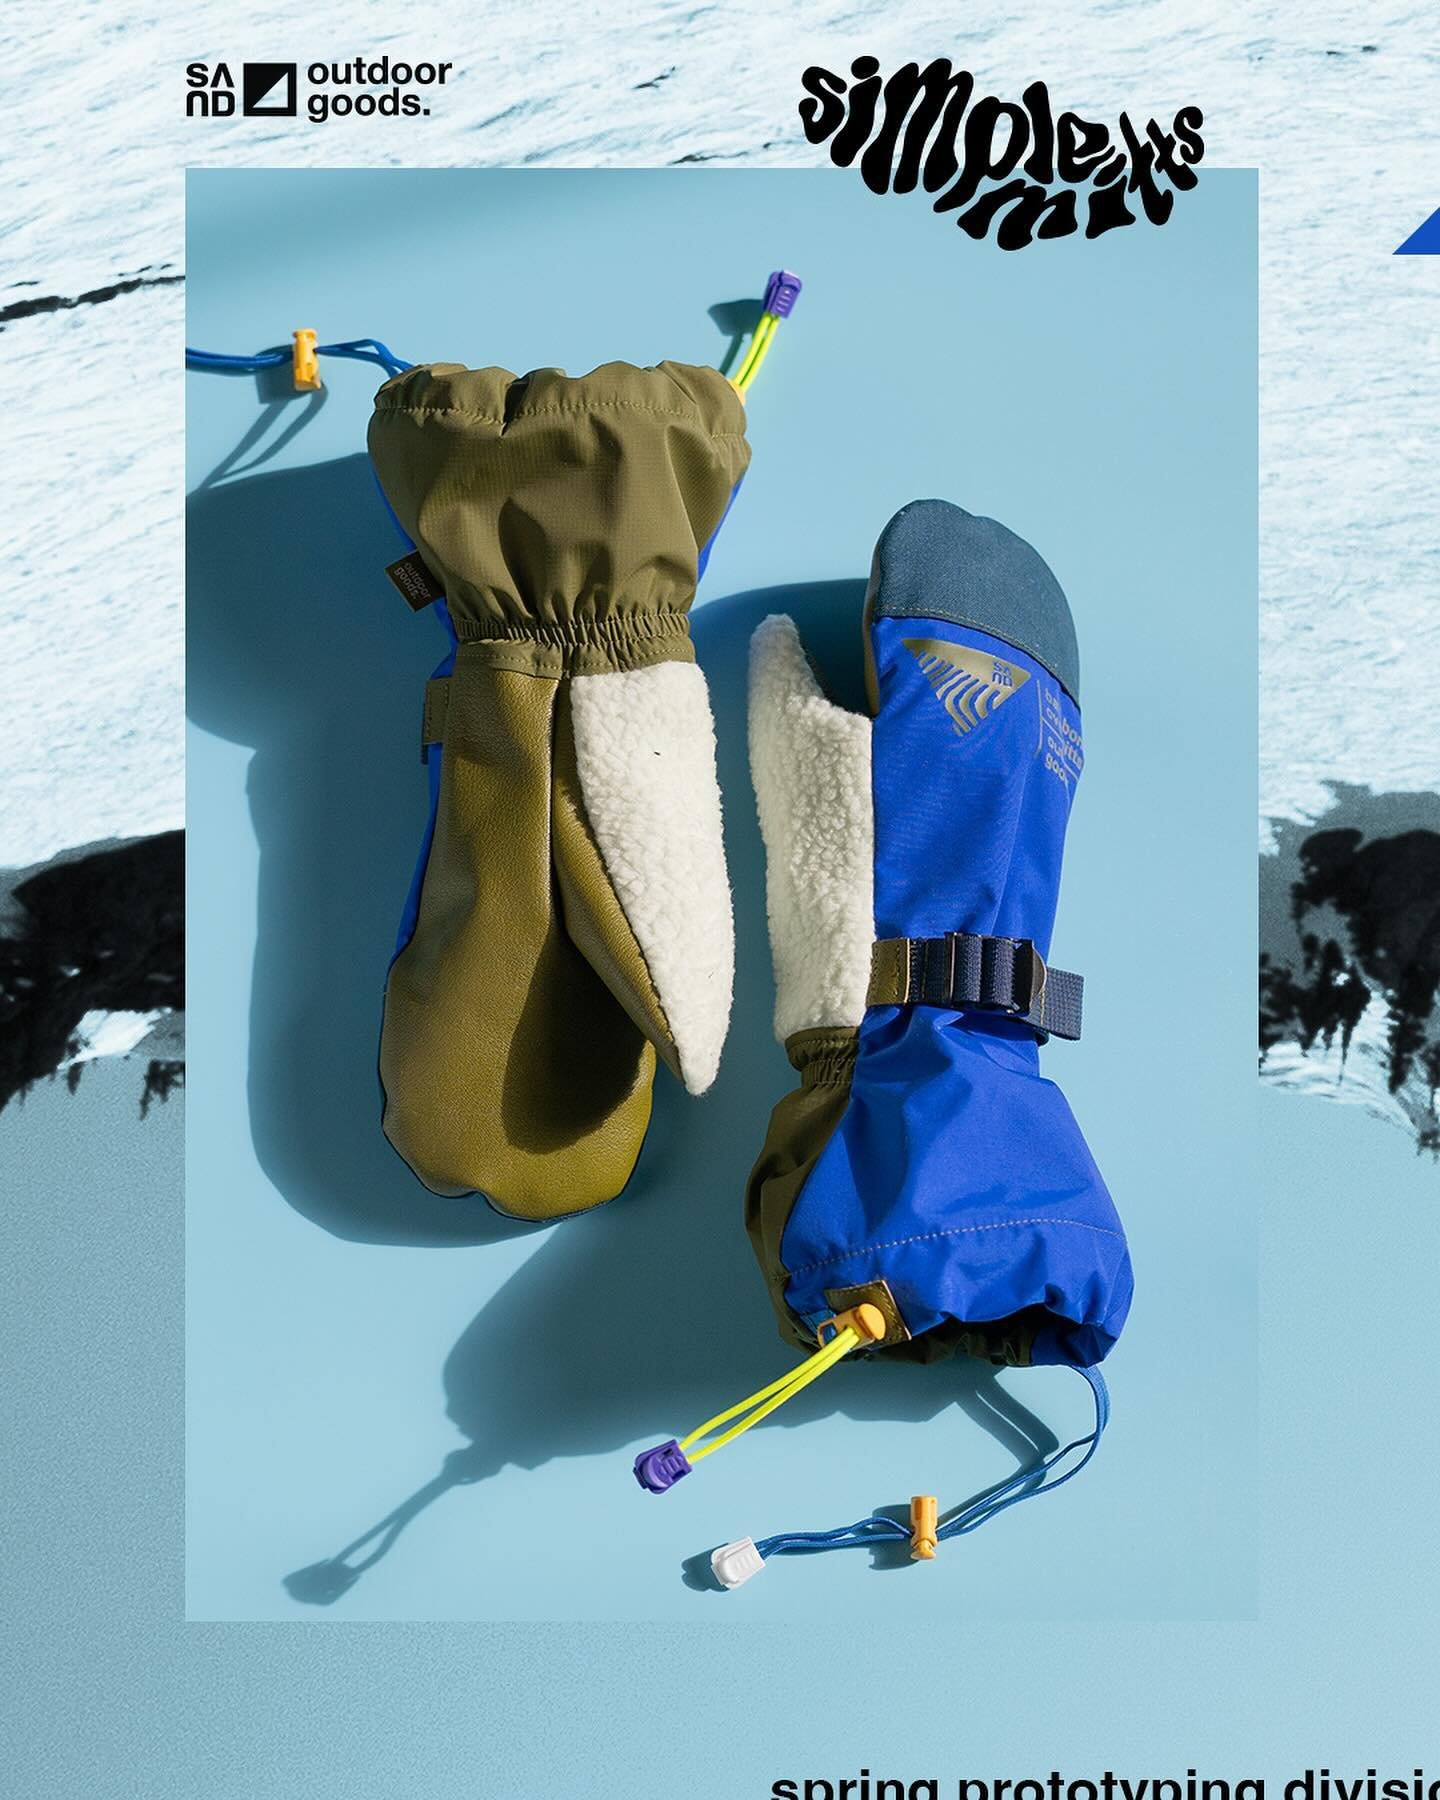 More spring test subjects. These bluebirds will be hand-delivered for a round of spring lap tests at Timberline. 2L shell, olive goat leather palms, polartec shearling fleece thumbs backed with 2L nylon, 3L micro fleece lightweight liner for spring w